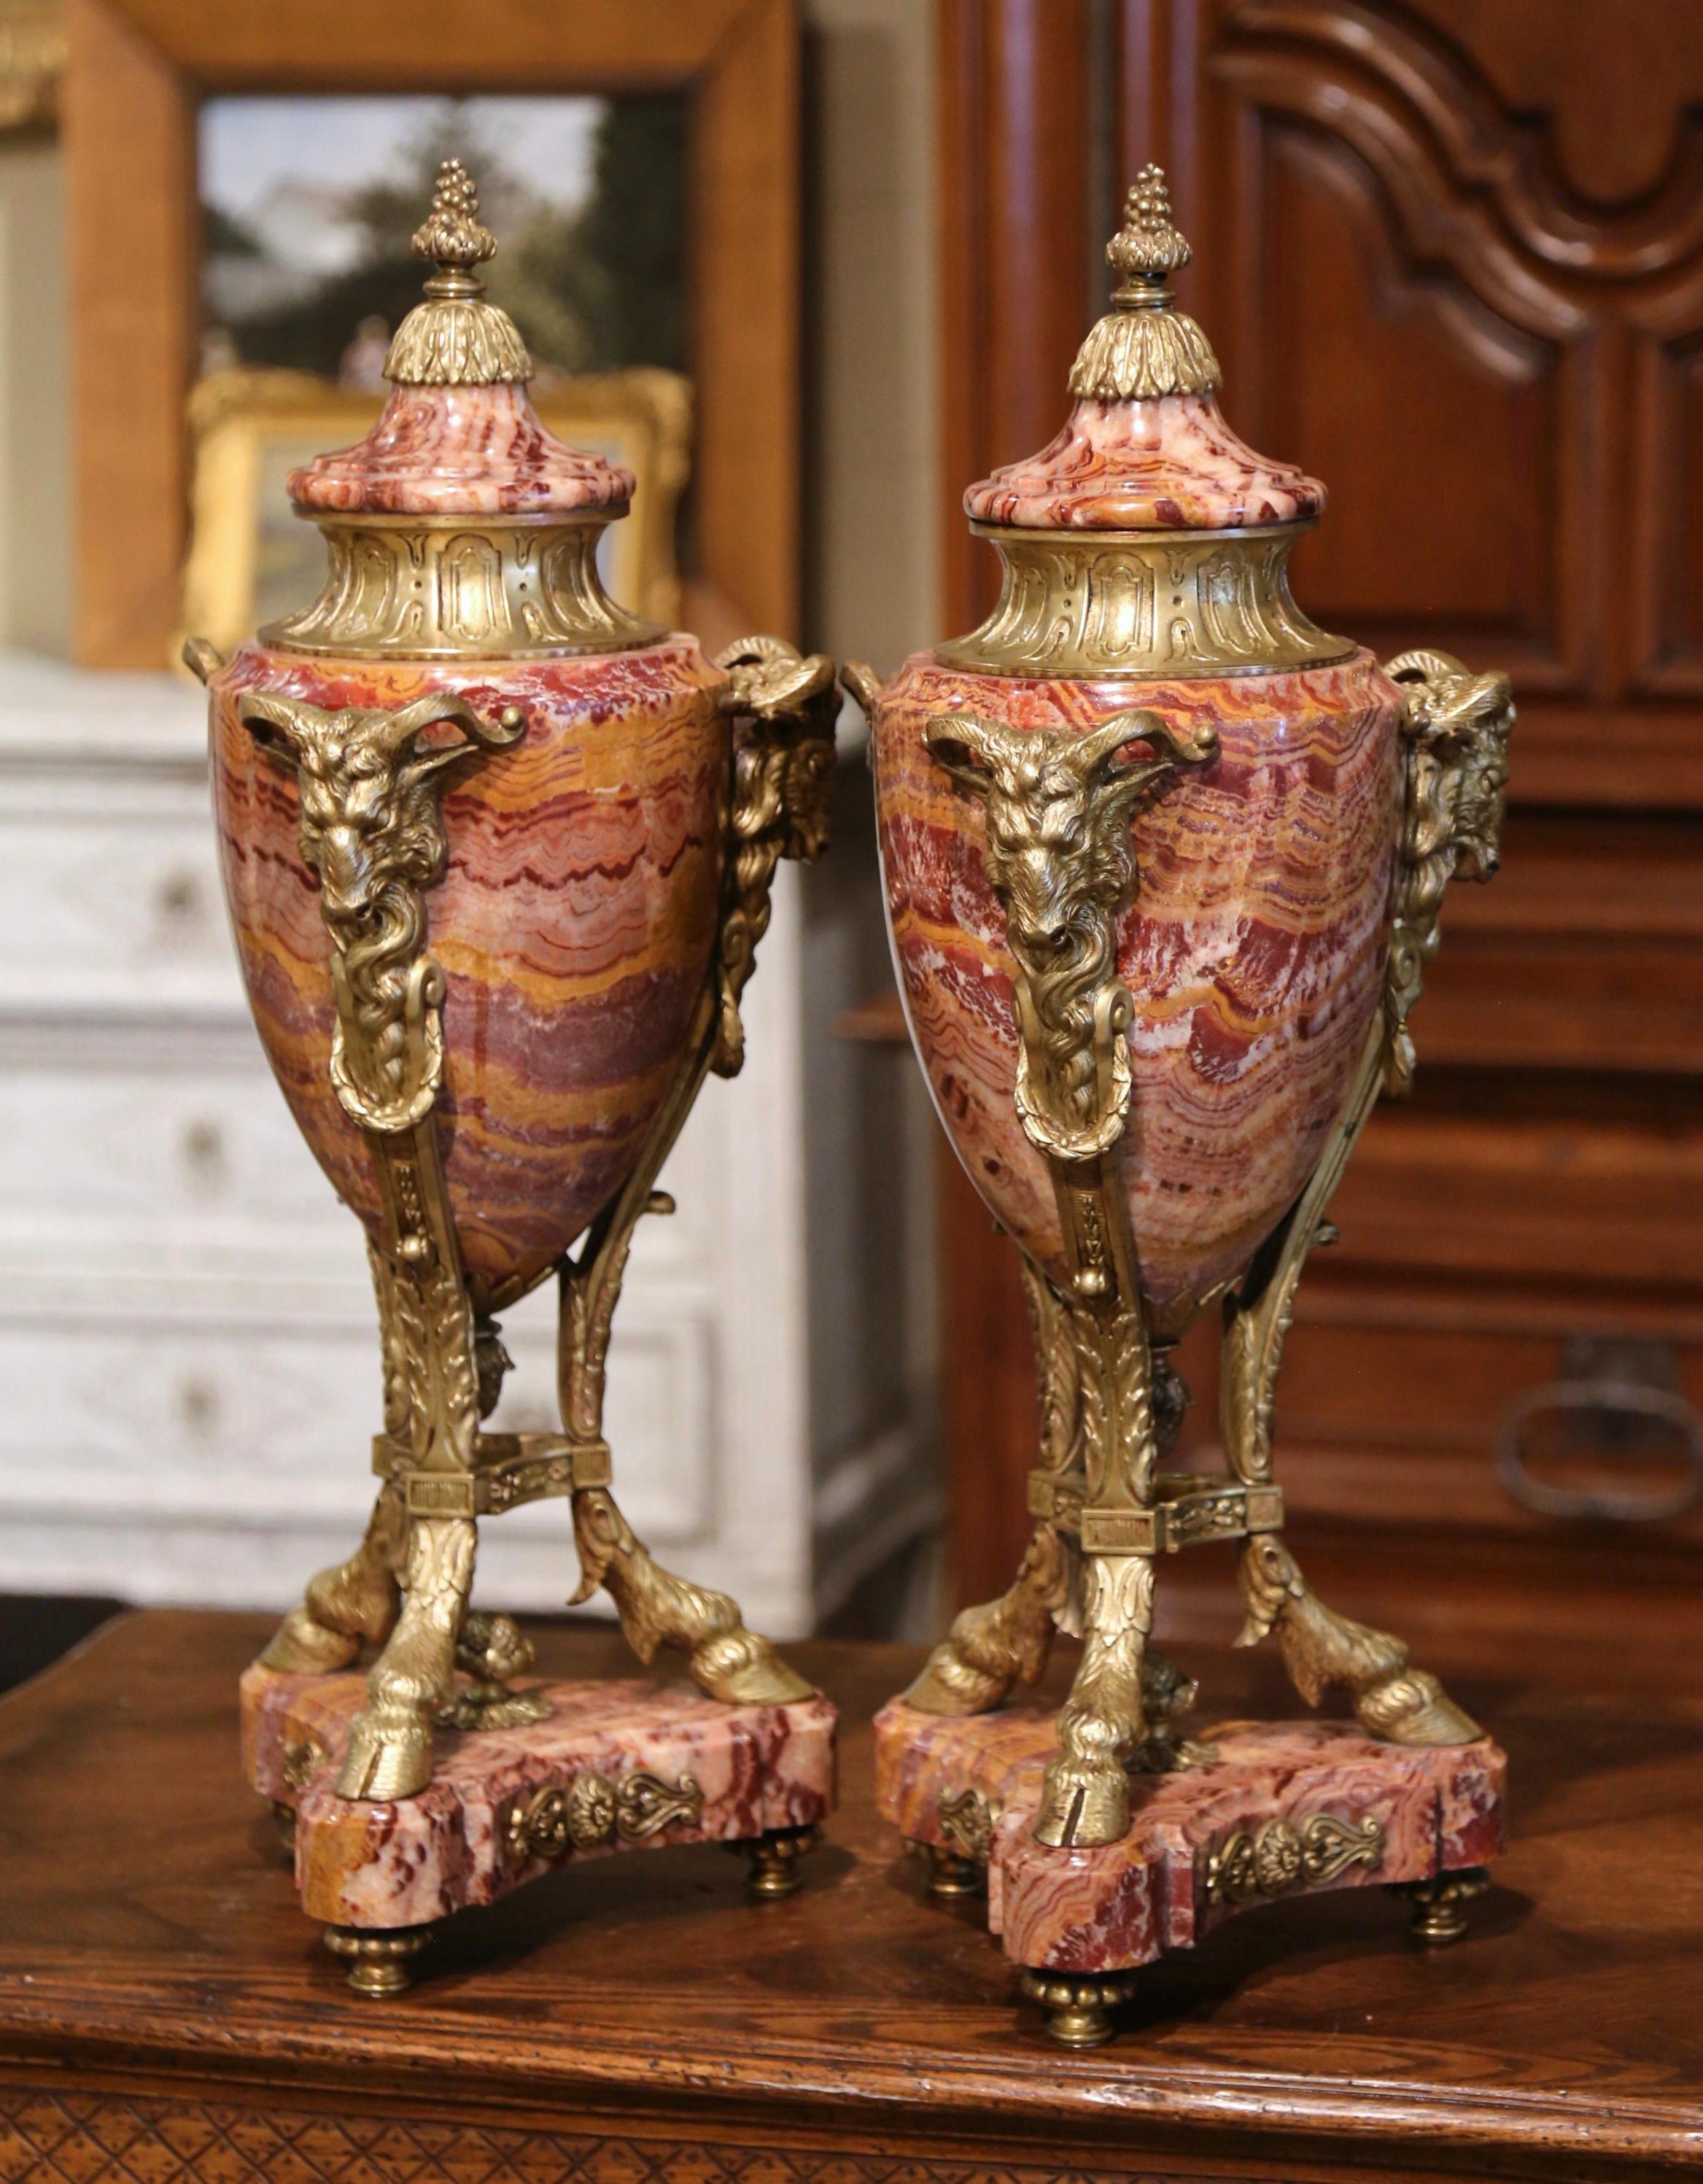 Neoclassical Pair of 19th Century Belgium Gilt Bronze-Mounted Variegated Onyx Covered Urns